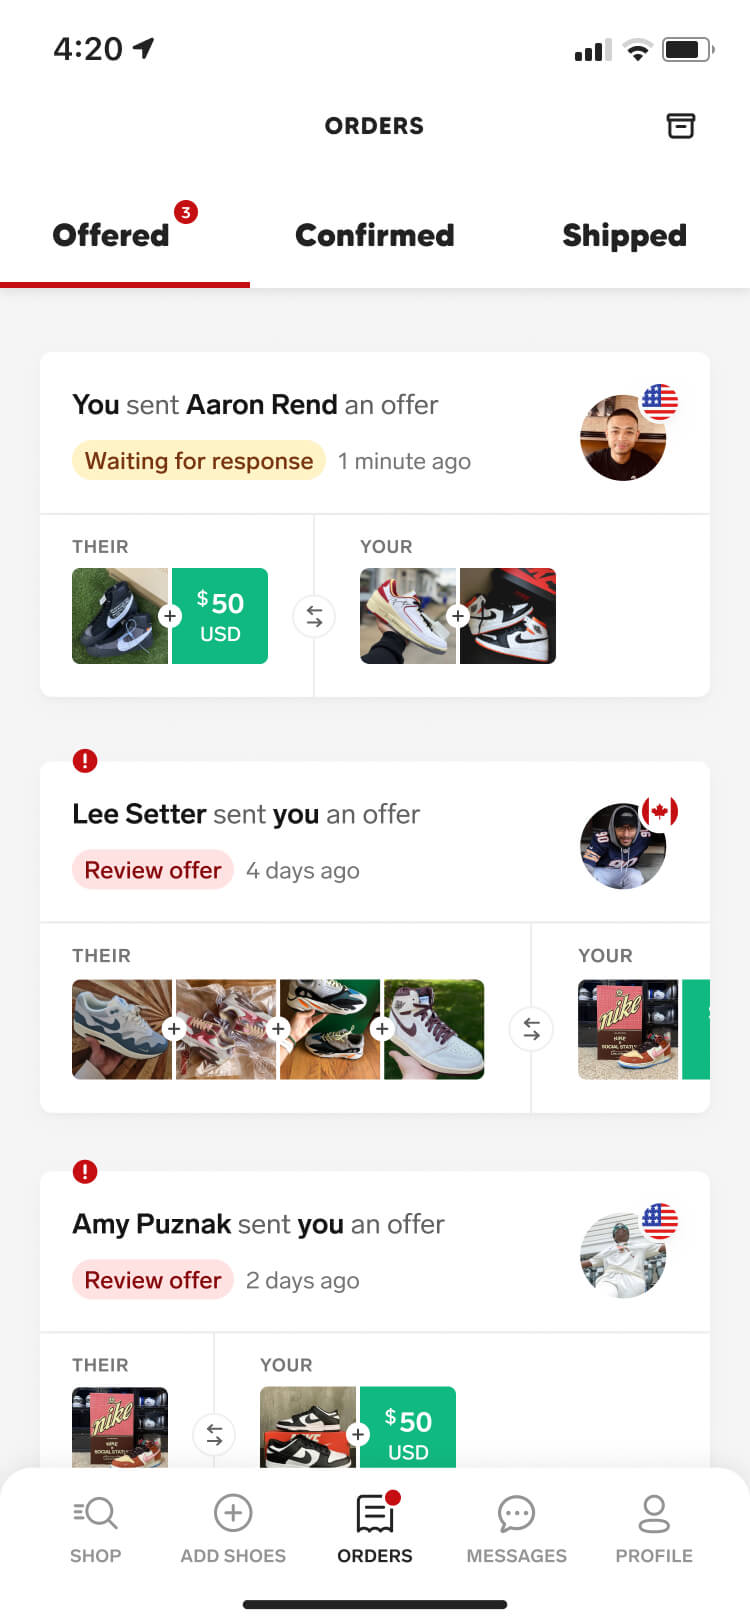 Orders screenshot of the Collect mobile app